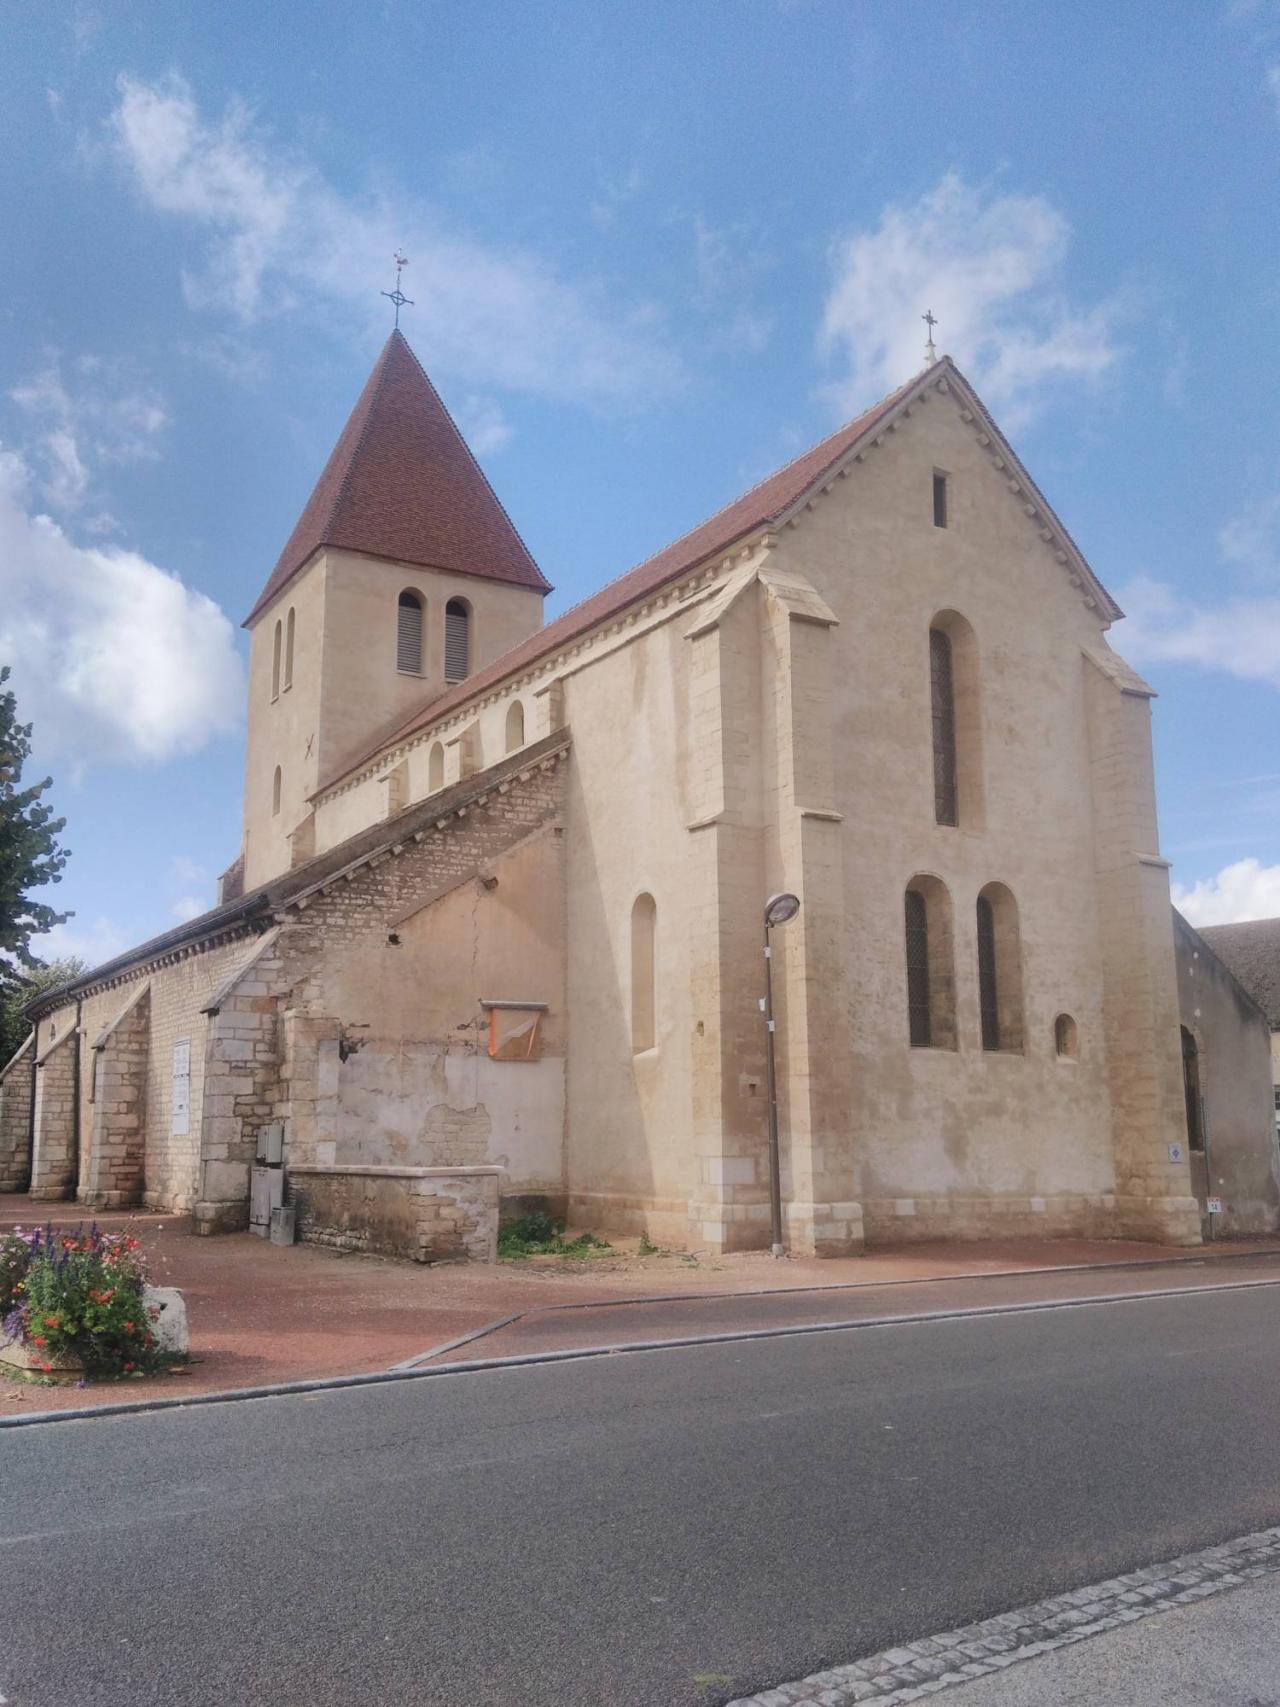 Side view of a 13th century church